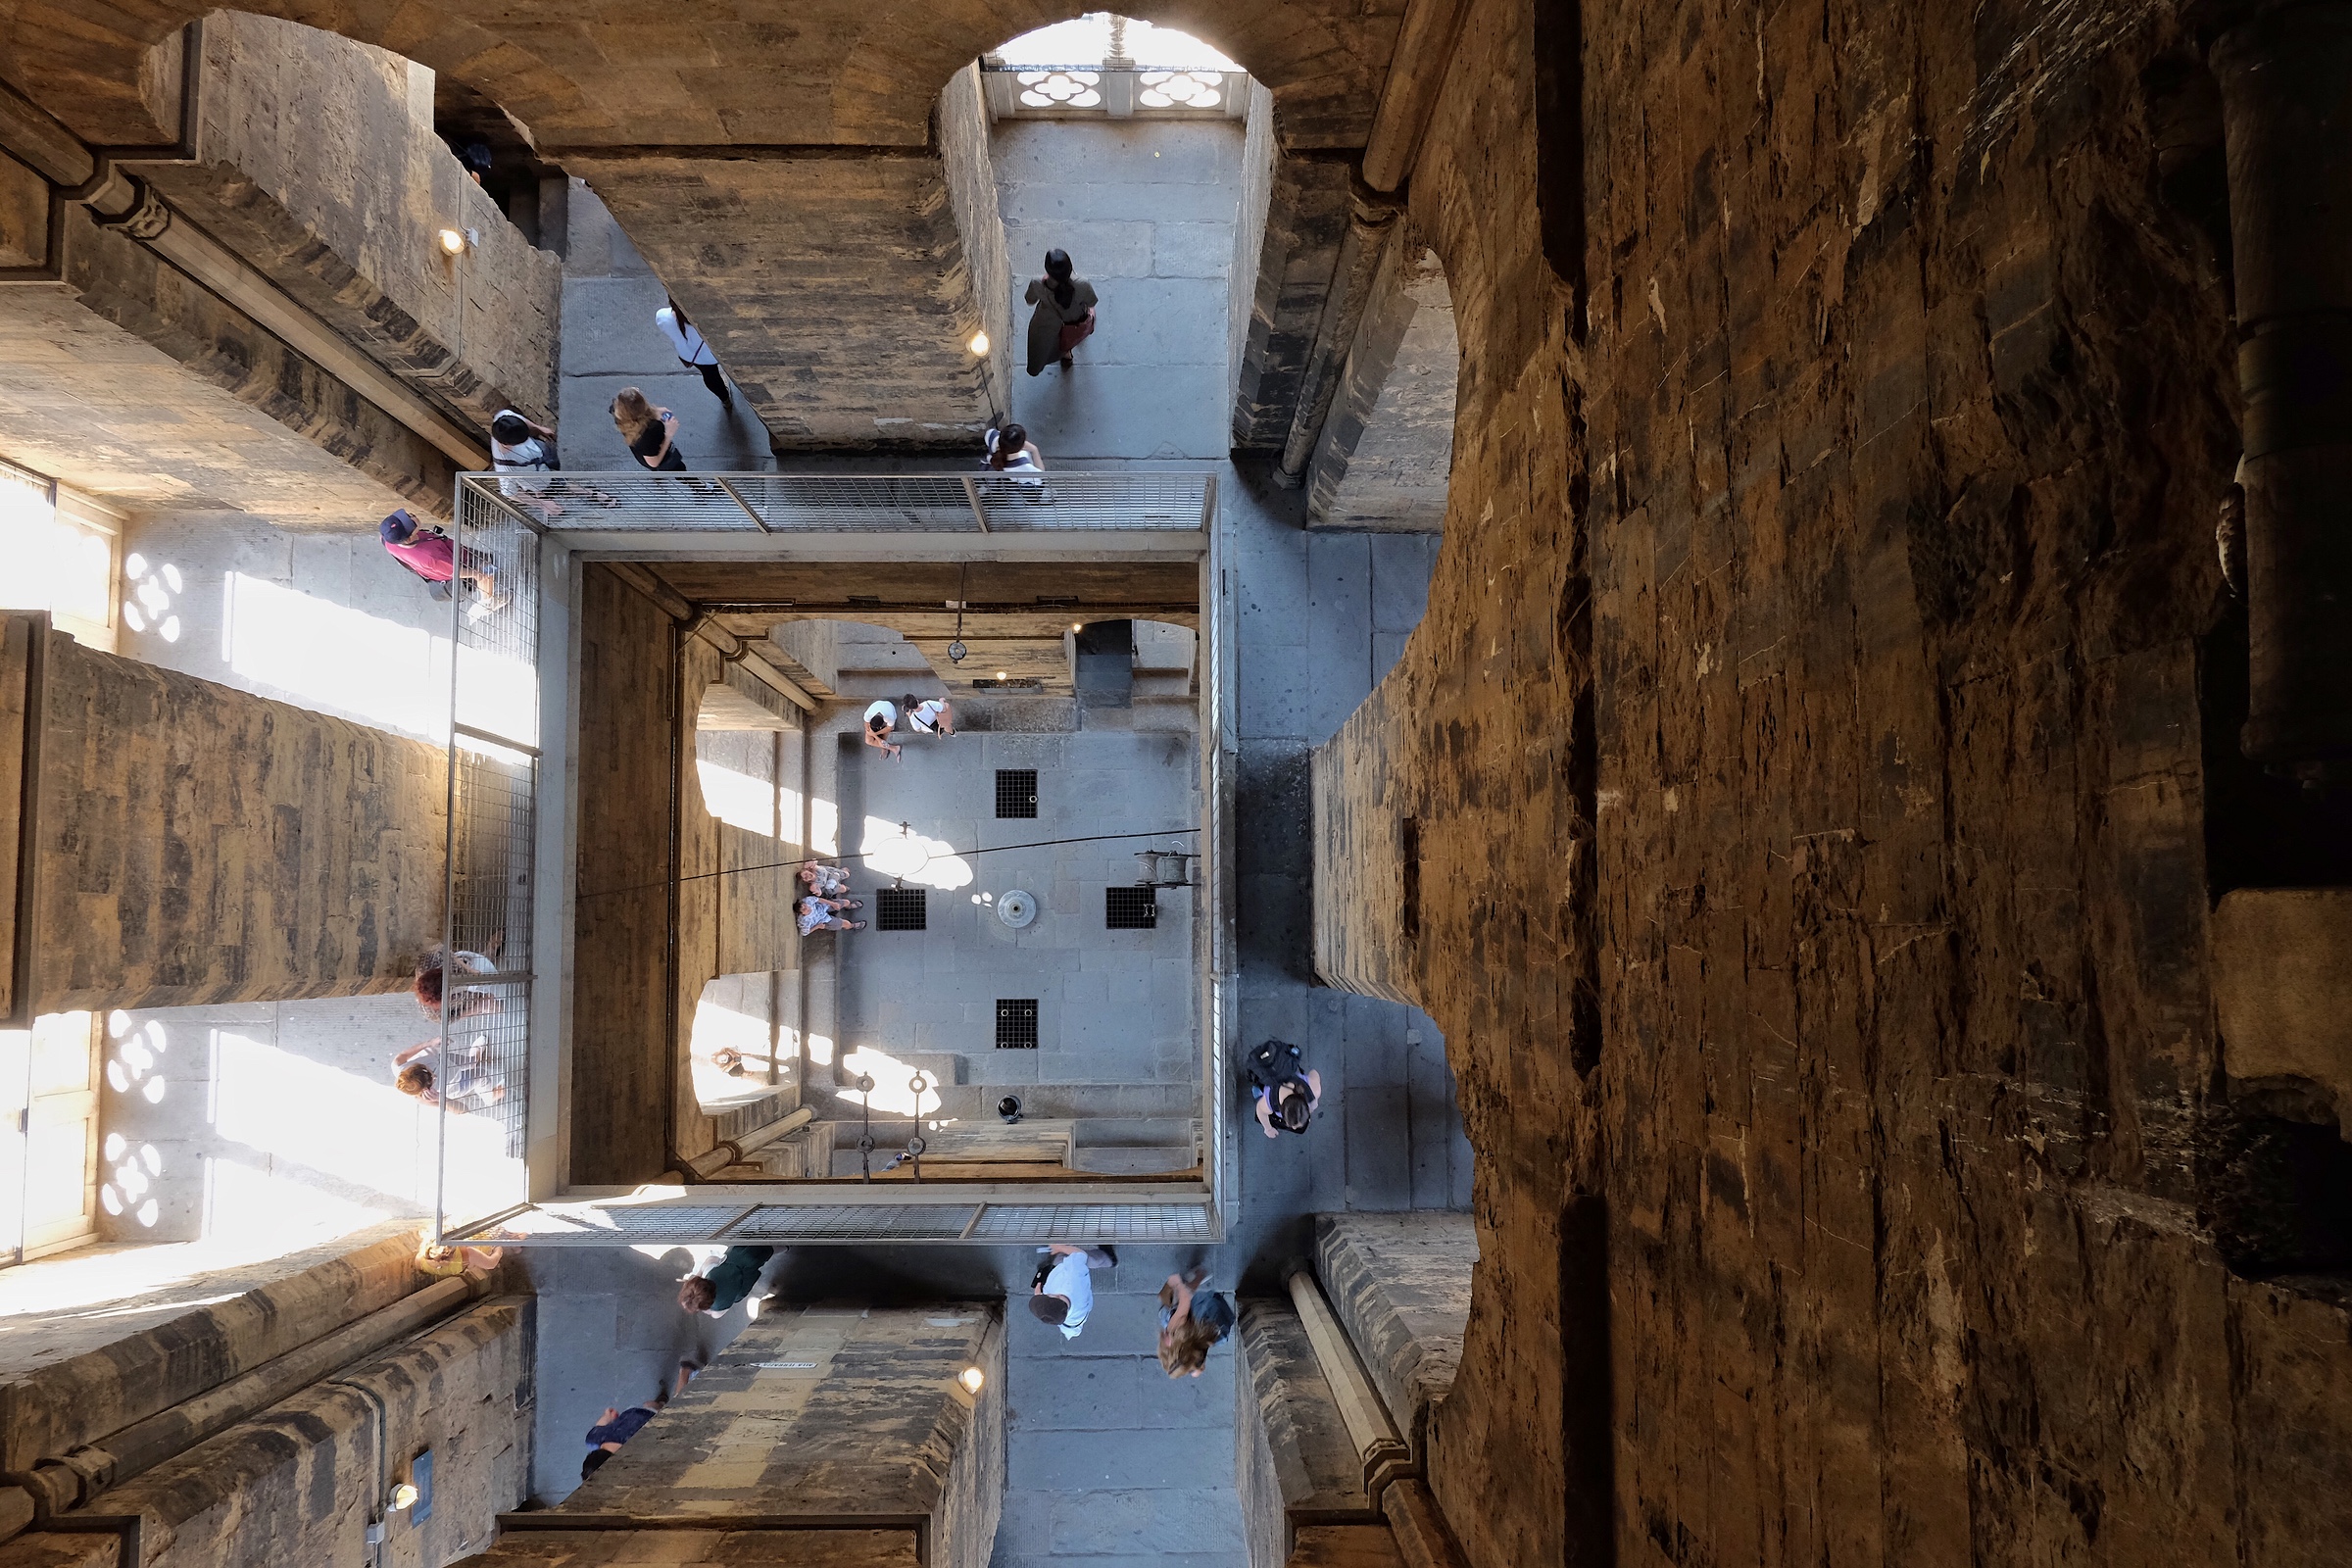 Looking down through the Santa Maria del Fiore Bell Tower.